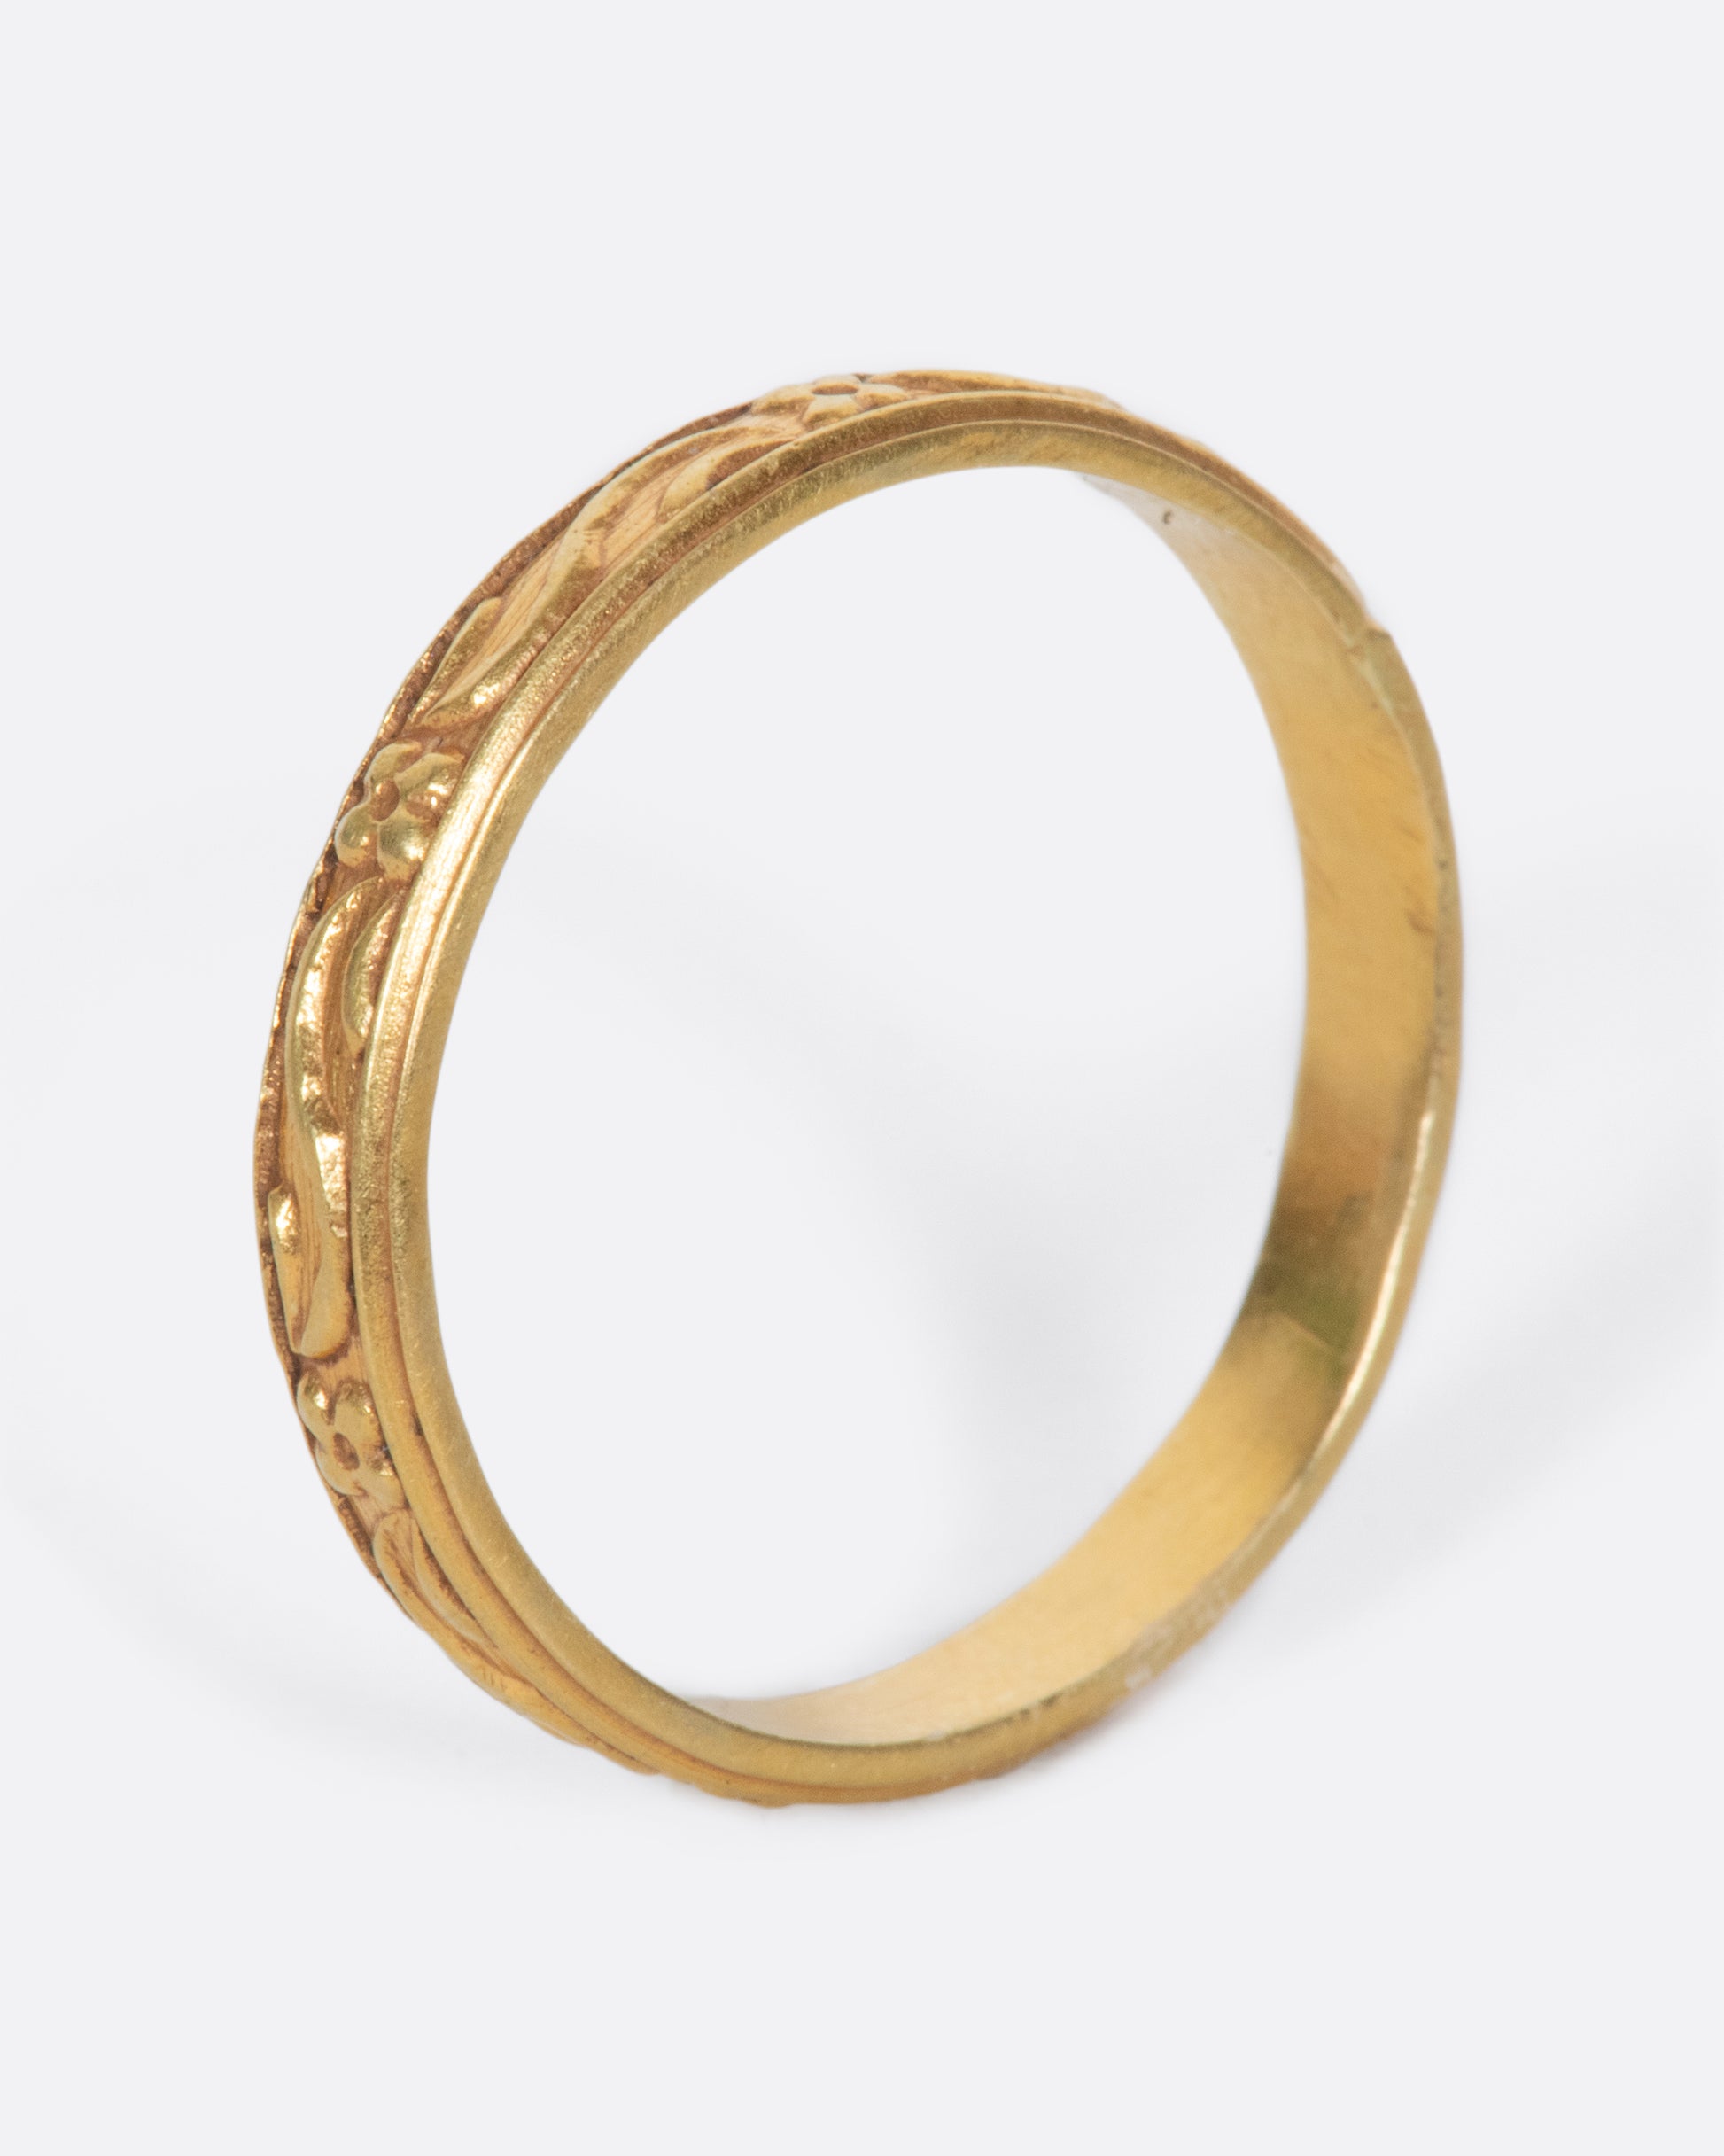 A vintage yellow gold narrow band ring with flowers and leaves throughout.